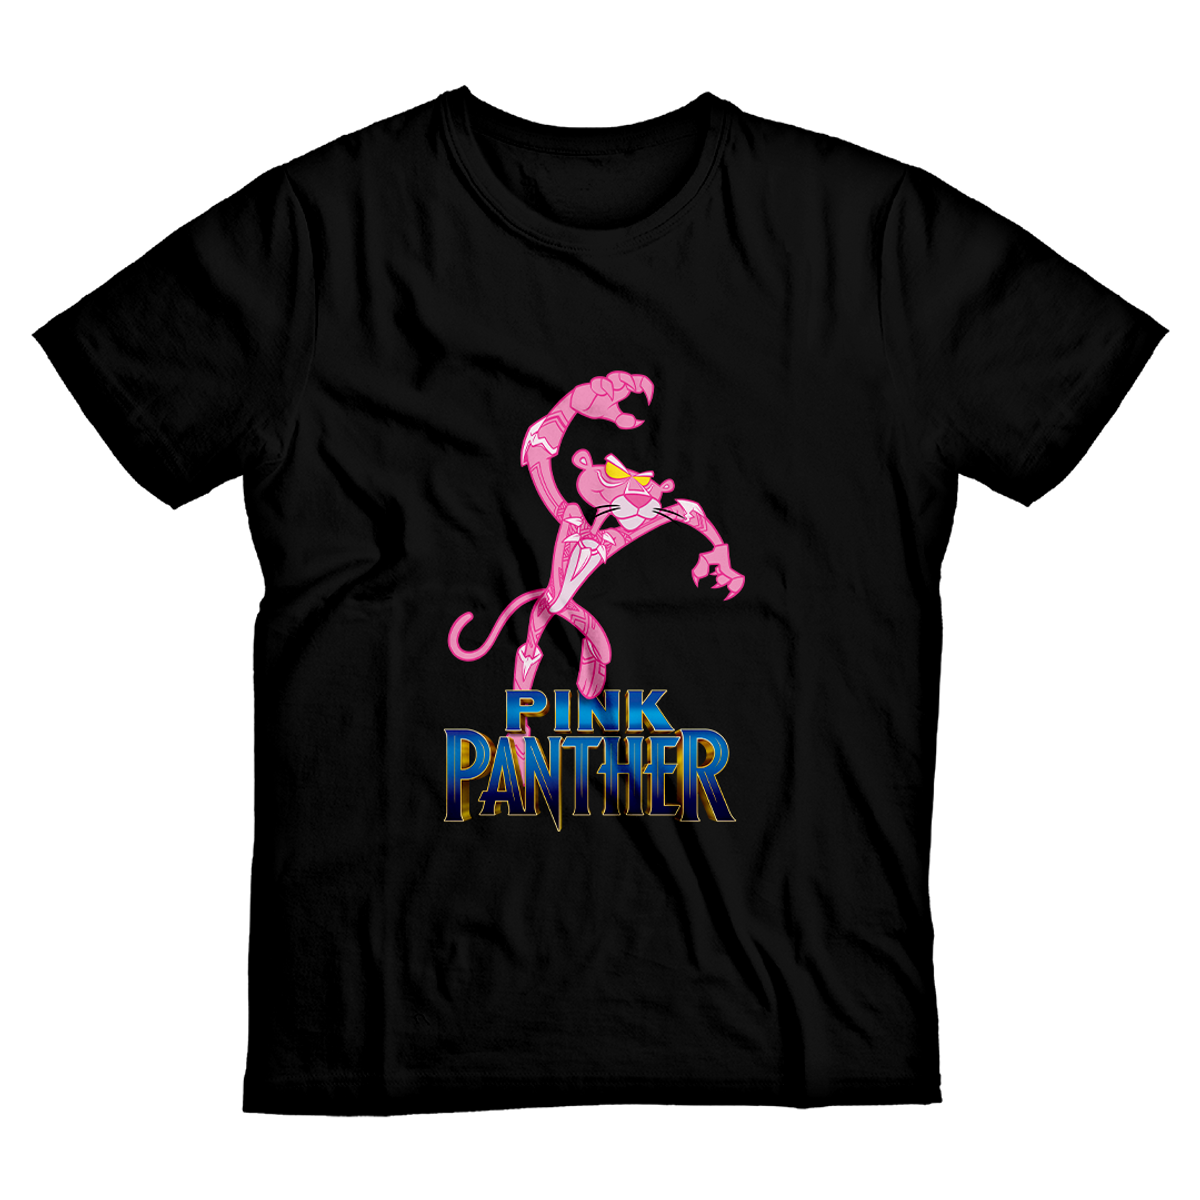 Nome do produto: Pink Panther <br>[T-Shirt Plus Size]</br>